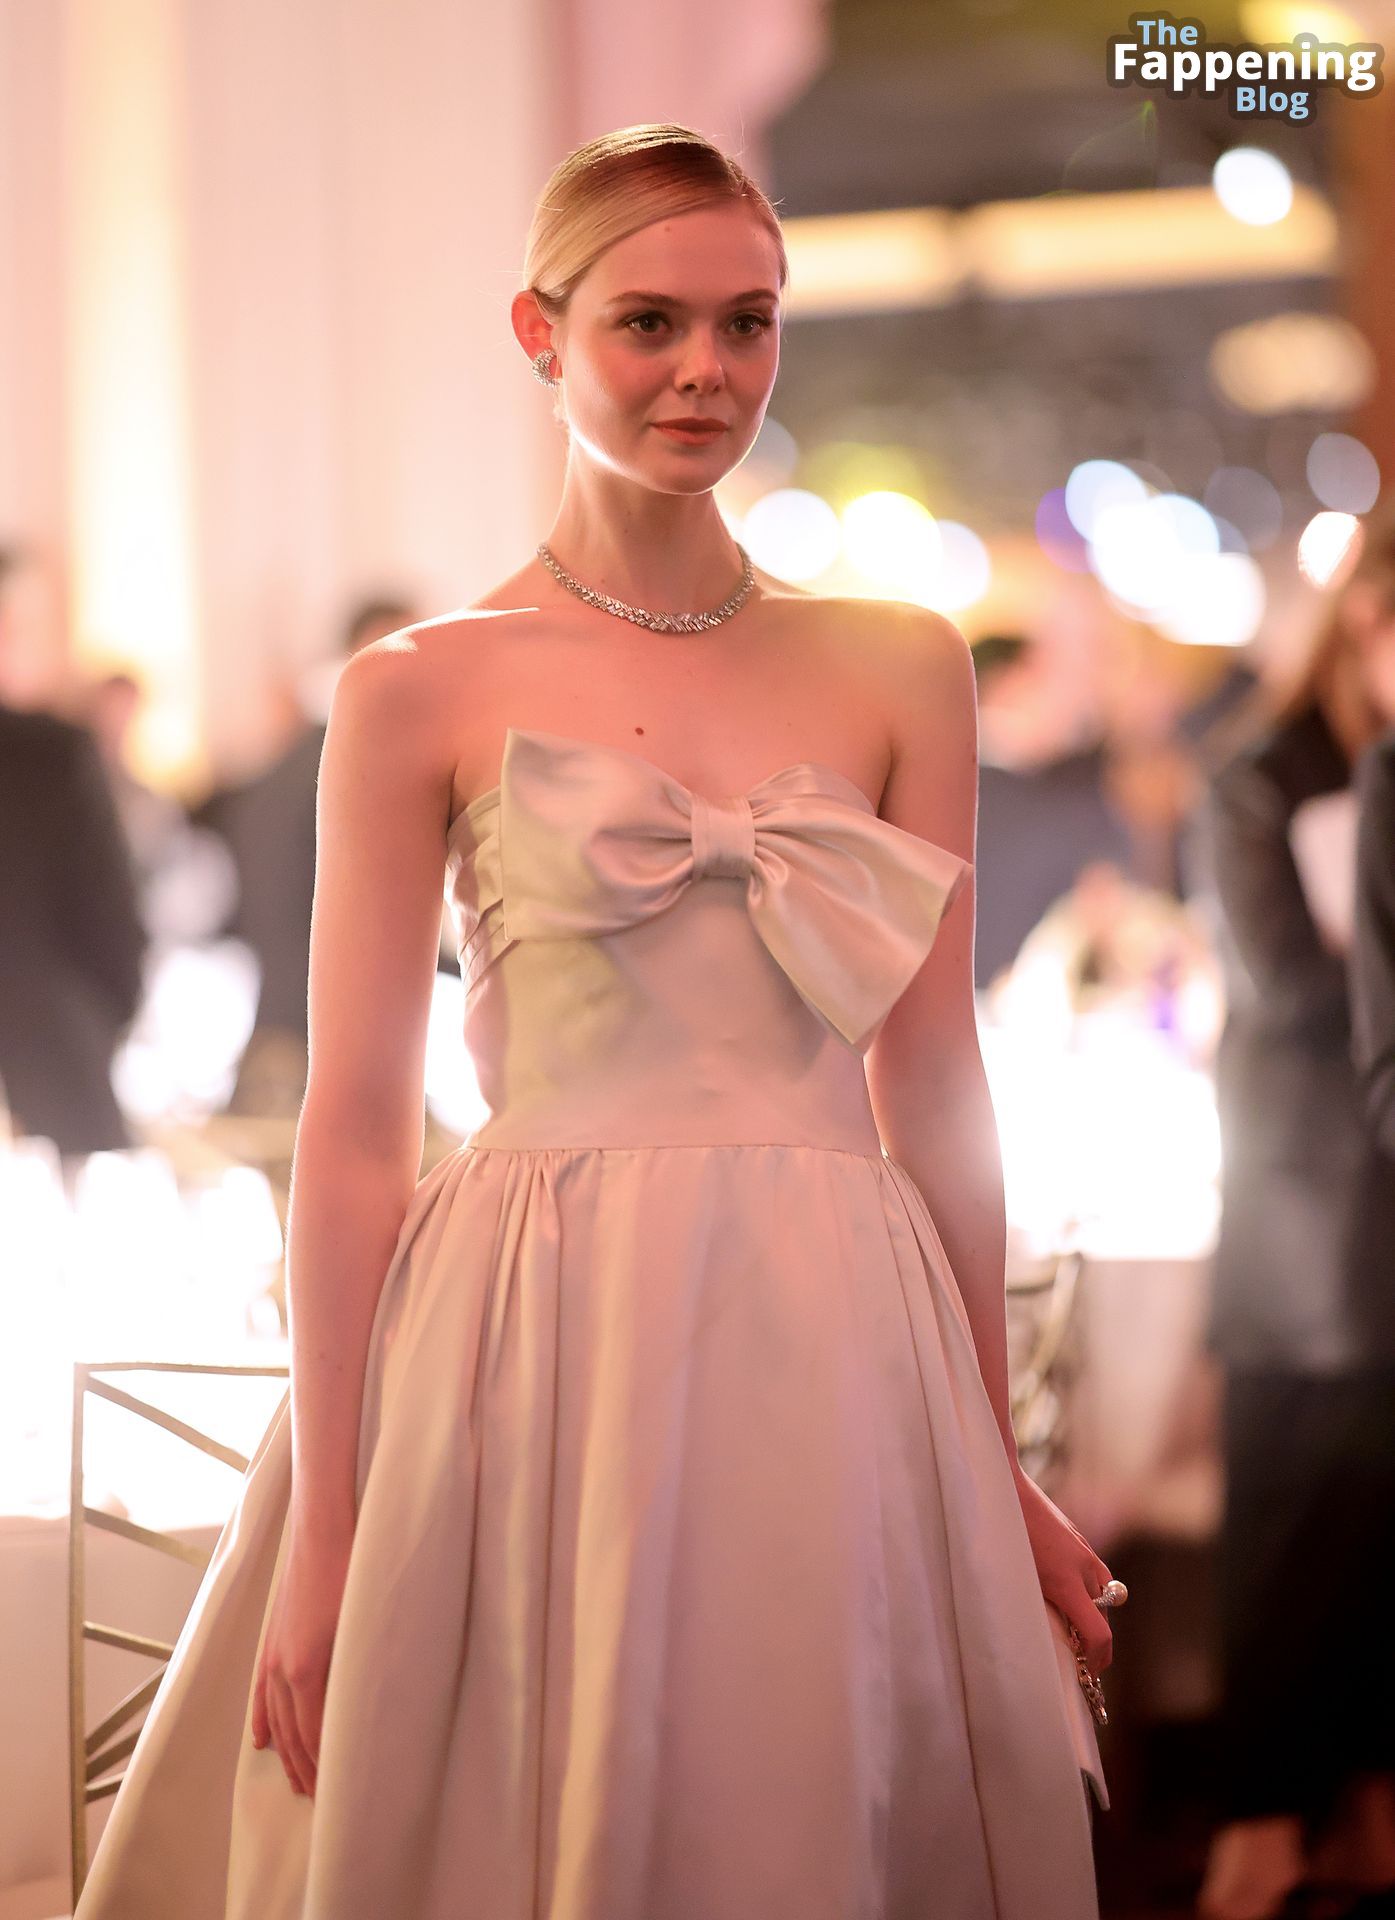 Elle-Fanning-Sexy-46-The-Fappening-Blog.jpg